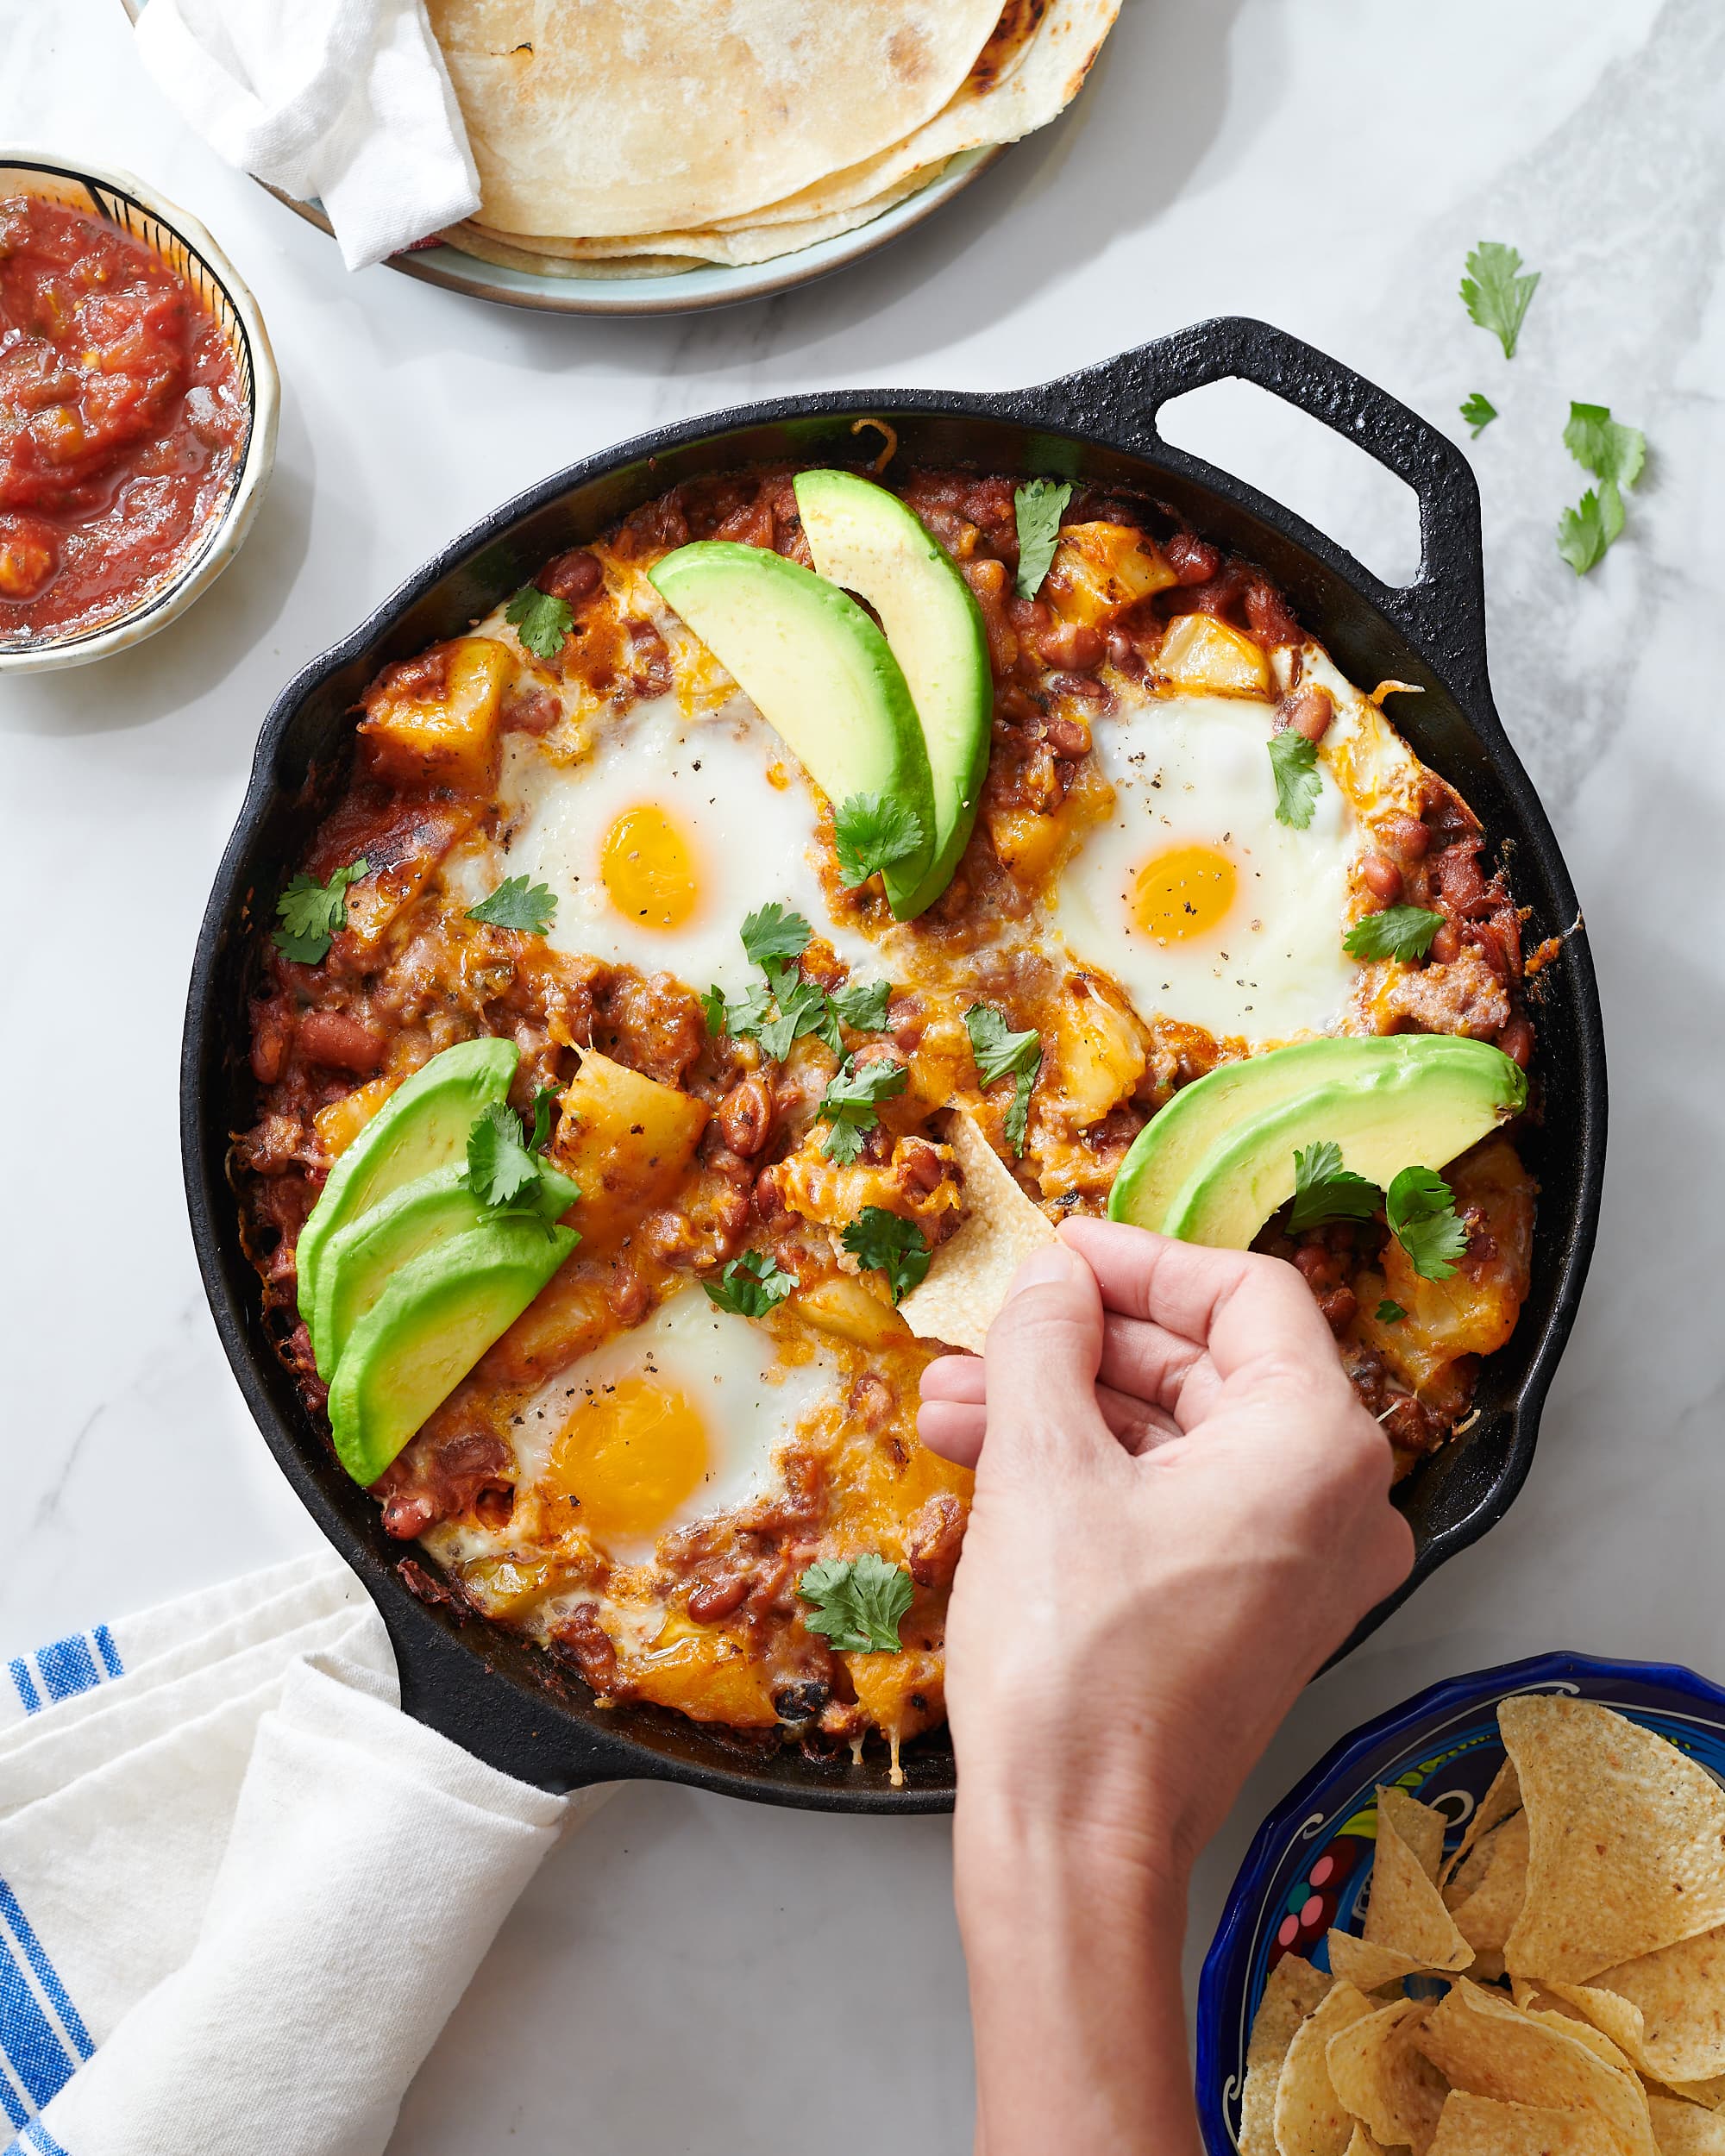 https://cdn.apartmenttherapy.info/image/upload/v1608304778/k/Photo/Recipes/2020-12-most-wanted-the-best-loaded-breakfast-skillet/k-photo-2020-12-breakfast-skillet-3.jpg